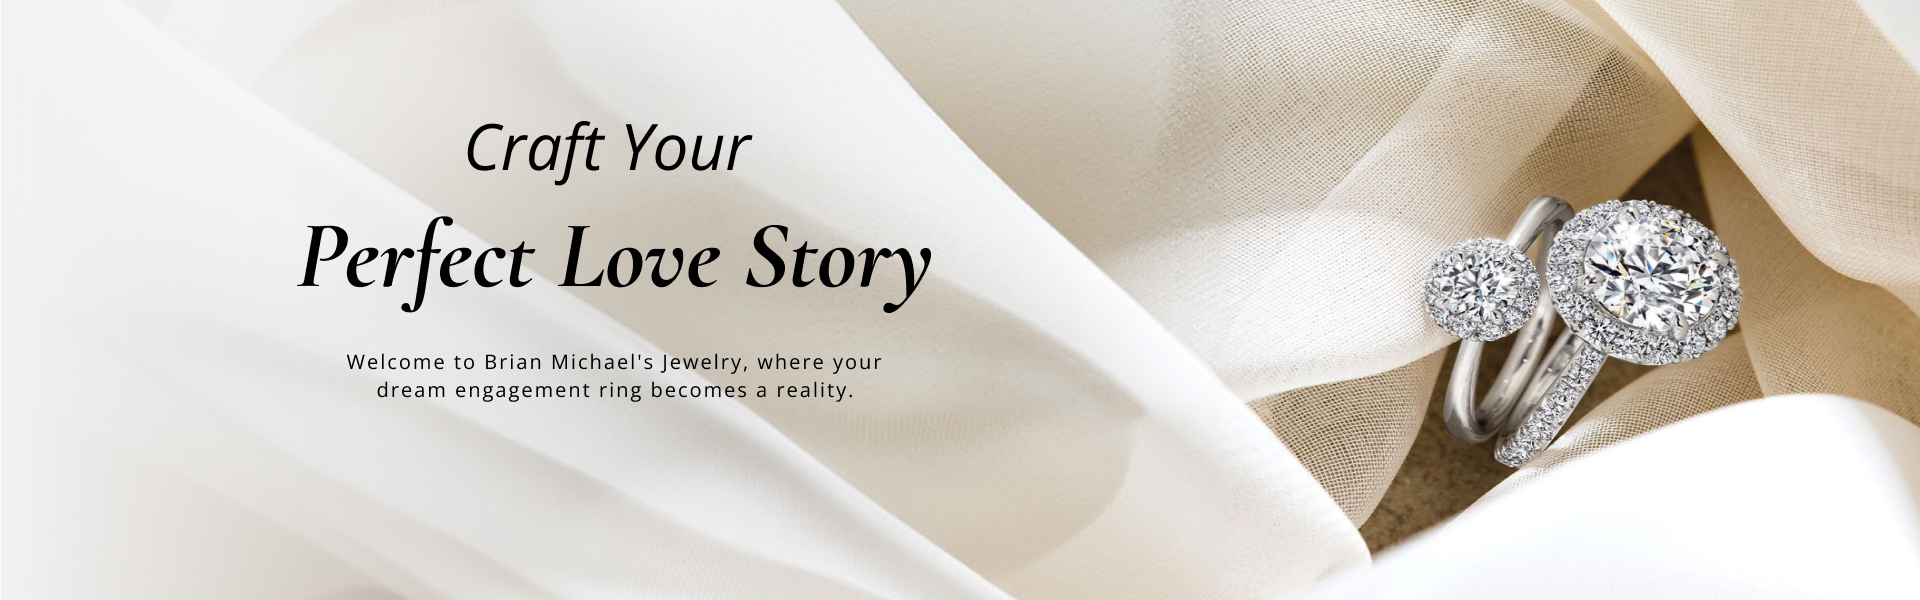 Craft Your Perfect Love Story